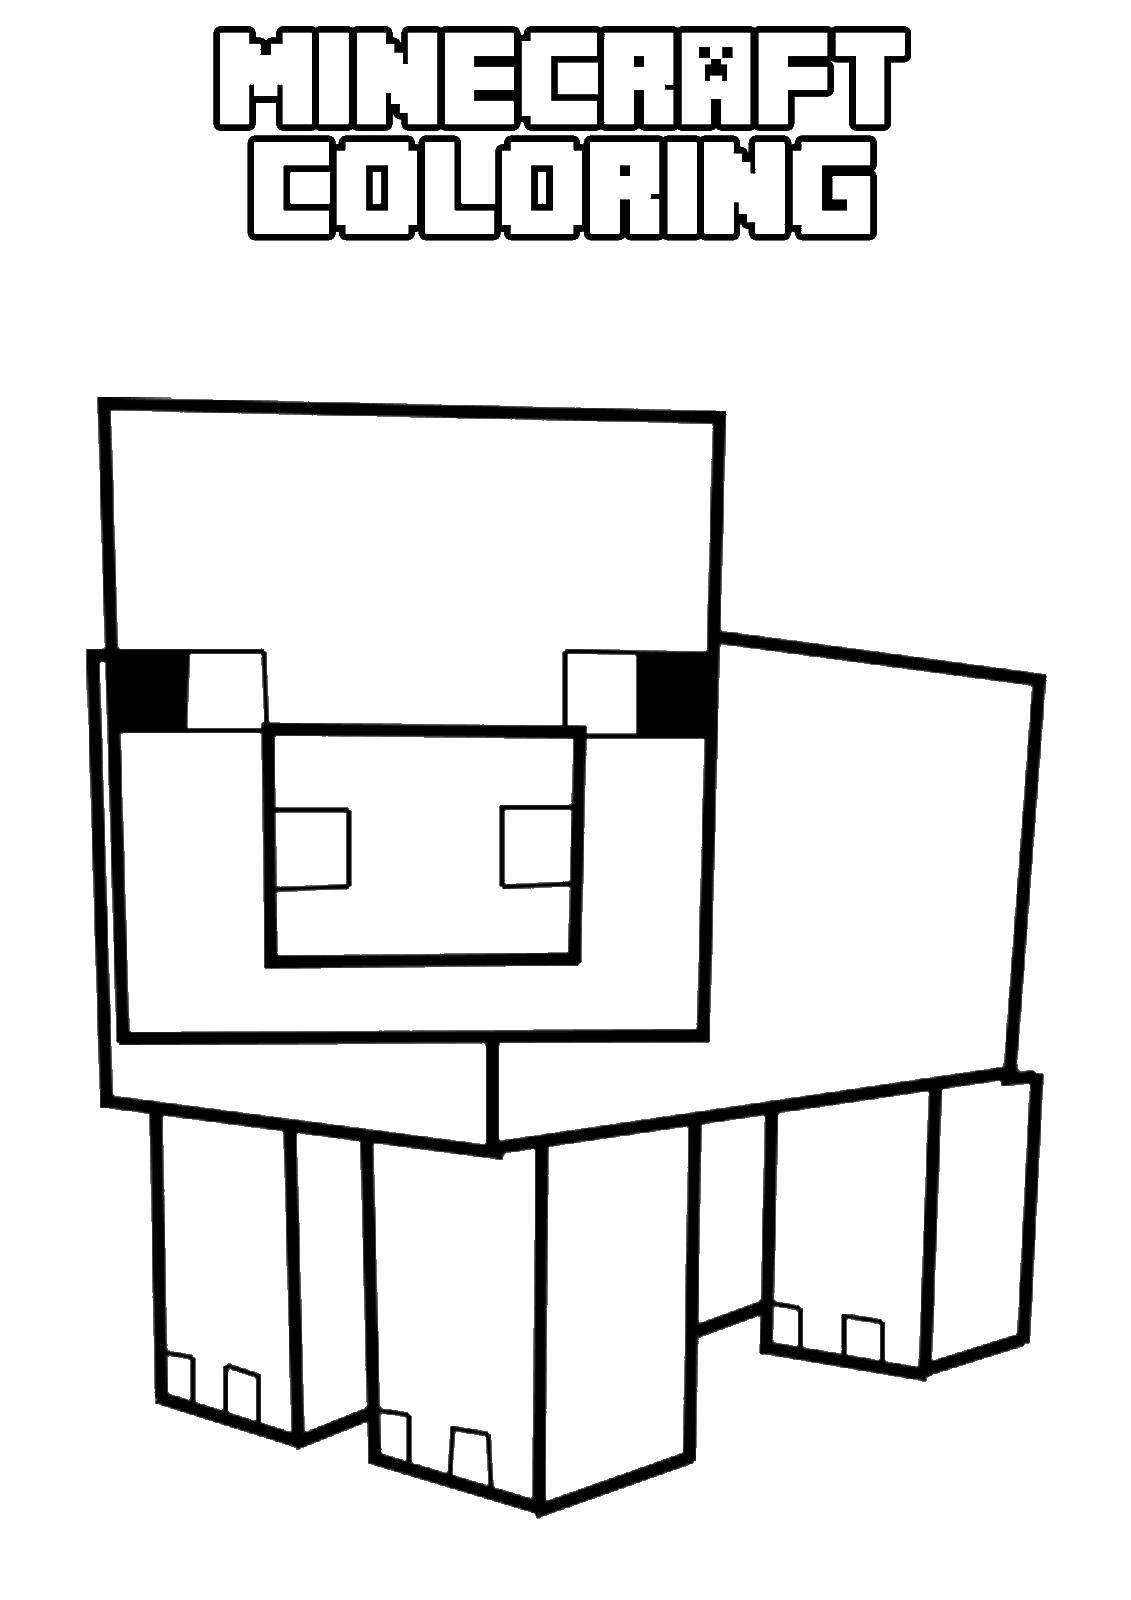 Coloring Minecraft pig. Category minecraft. Tags:  minecraft pig.